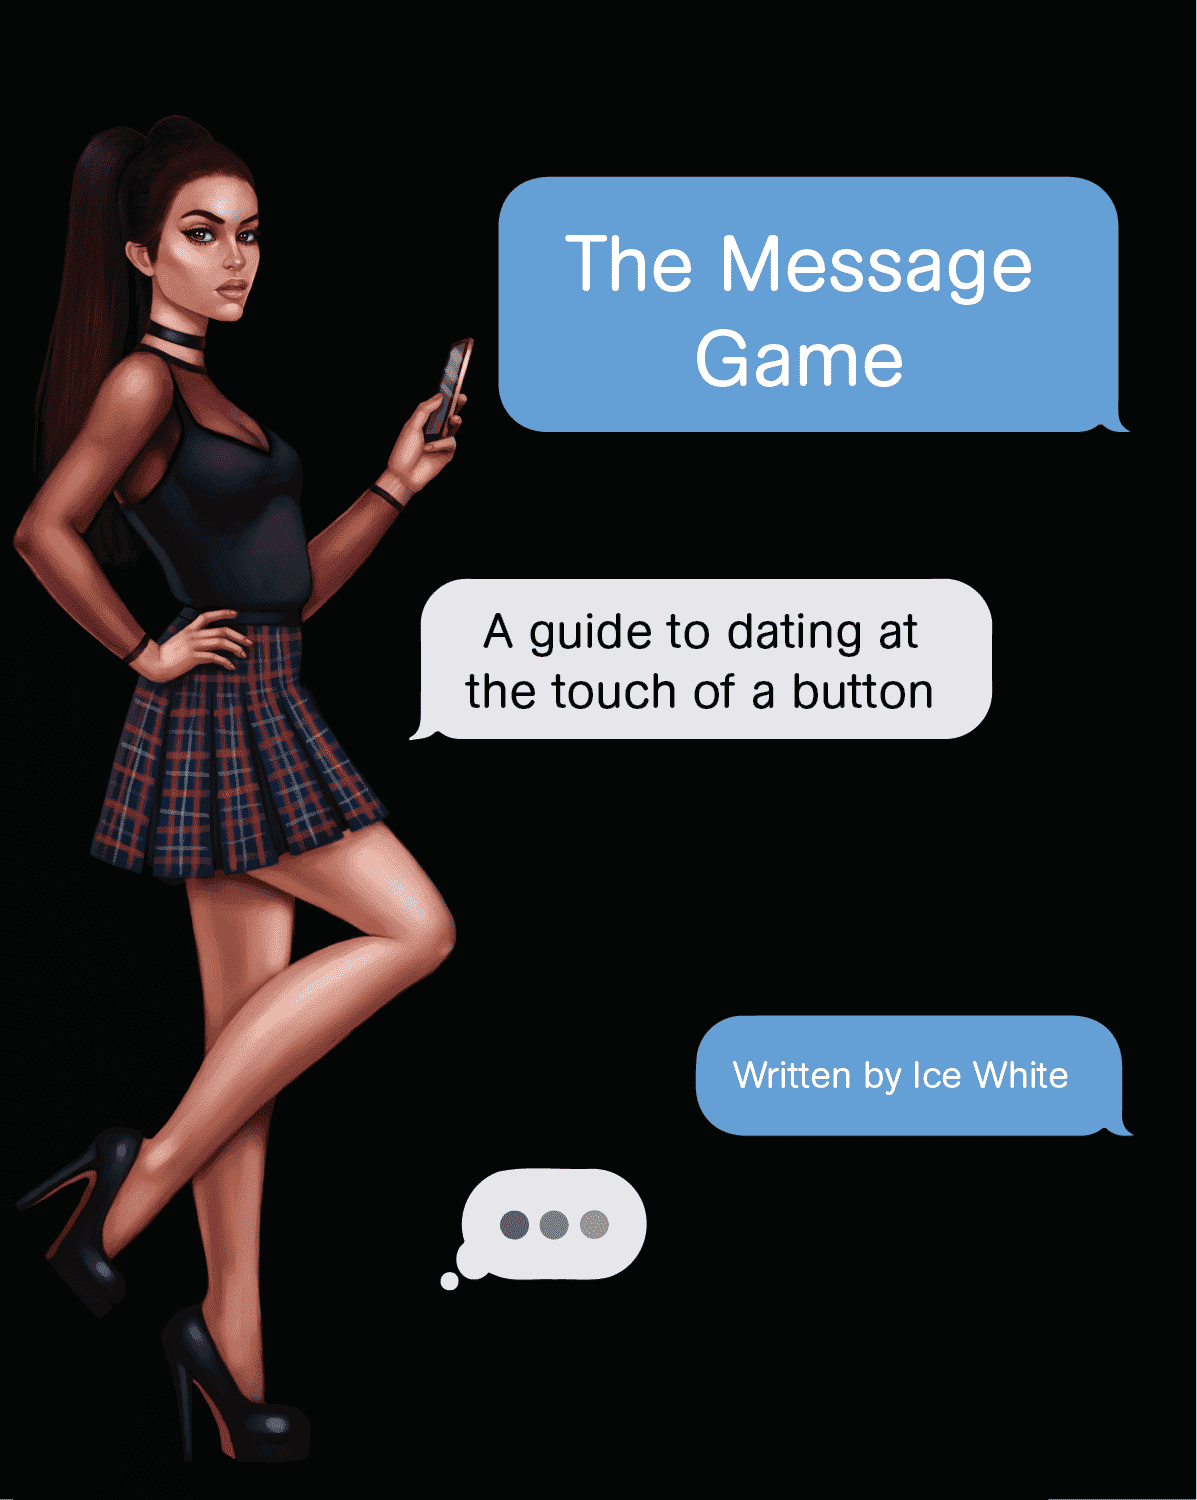 The Message Game A Guide To Dating At The Touch Of A Button Ice White 2020 The Game Neil Strauss Goodreads Amazon The Setup Dan Bilzerian PUA Seduction Books